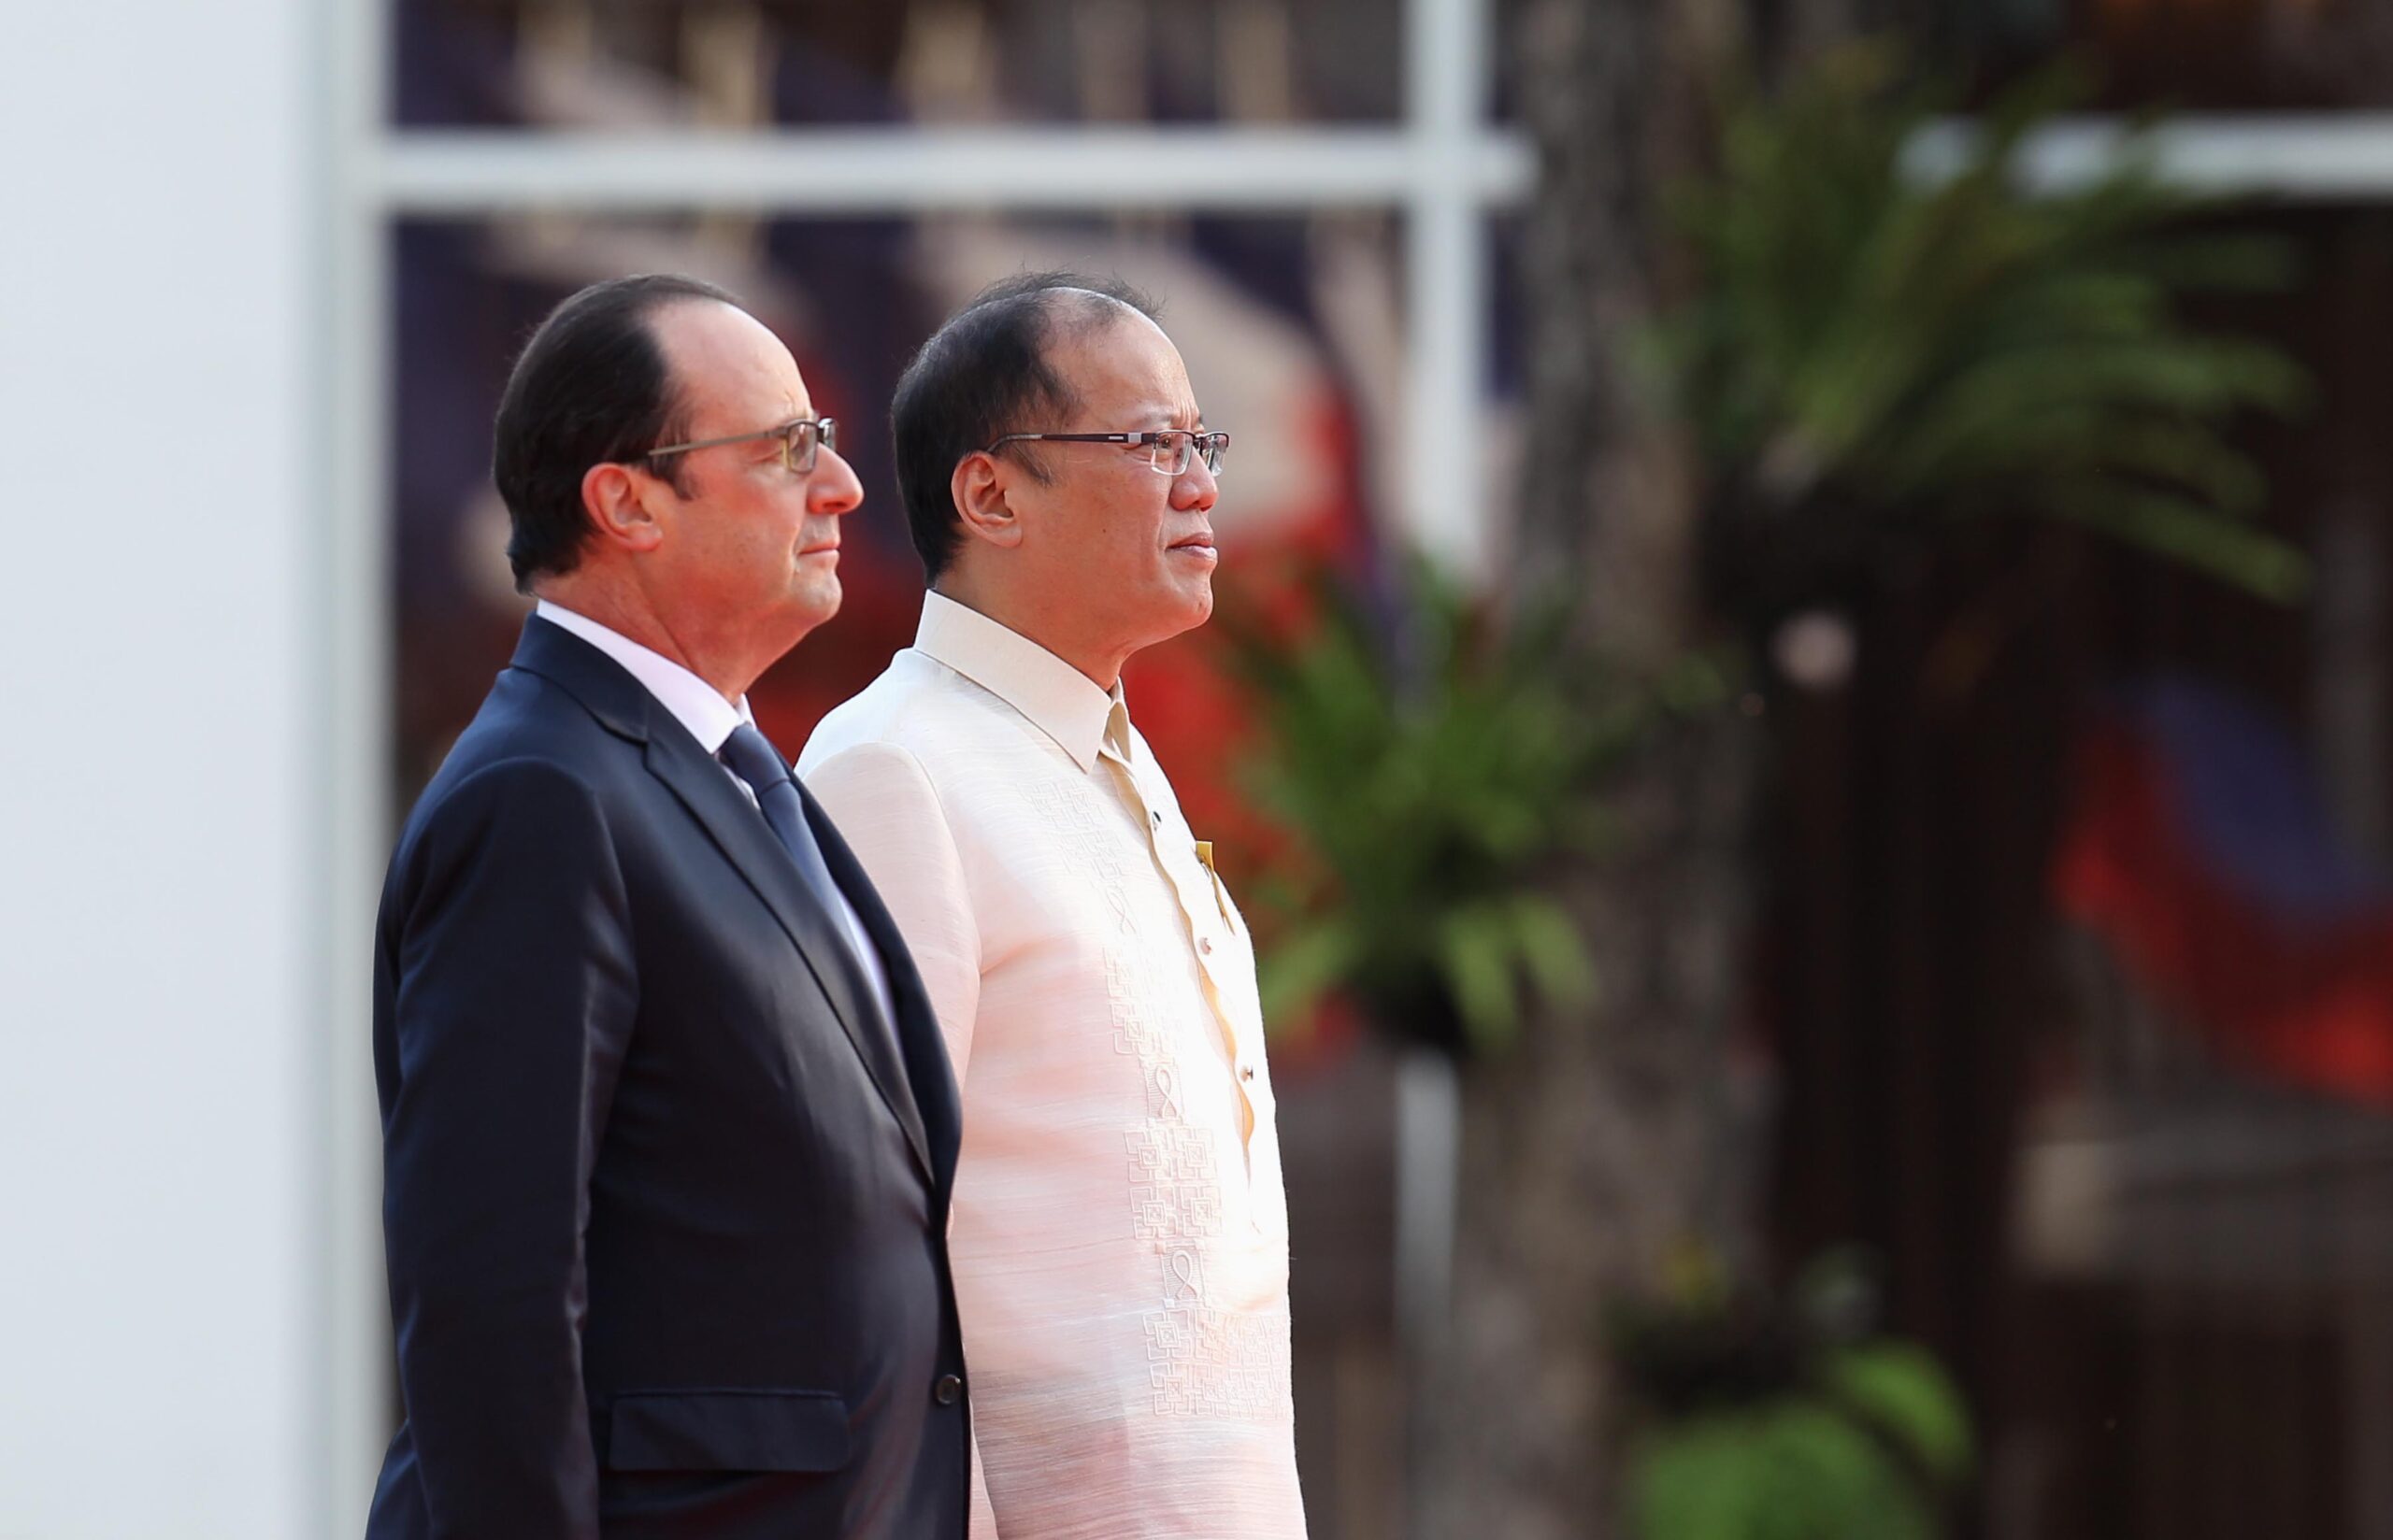 Aquino: ‘Philippines stands shoulder to shoulder with France’